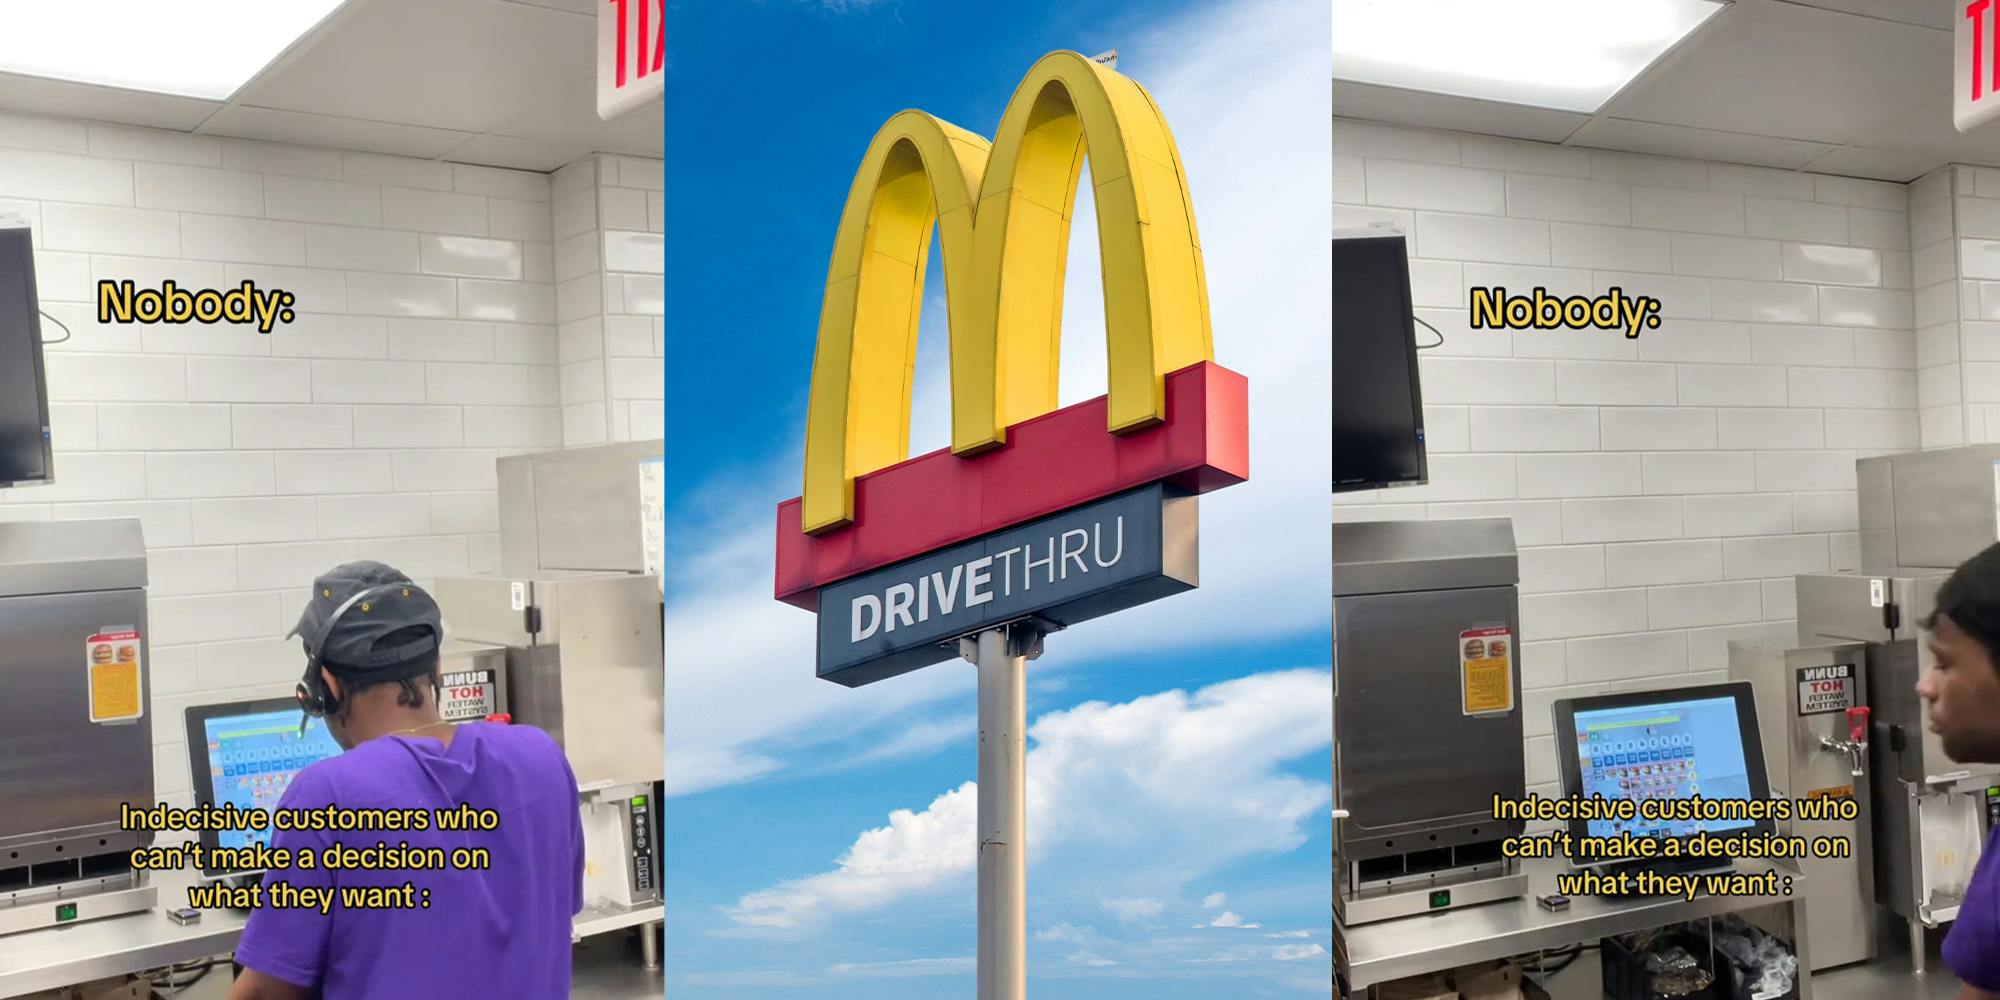 McDonald's worker explains the dislike for customers who don't know what to order